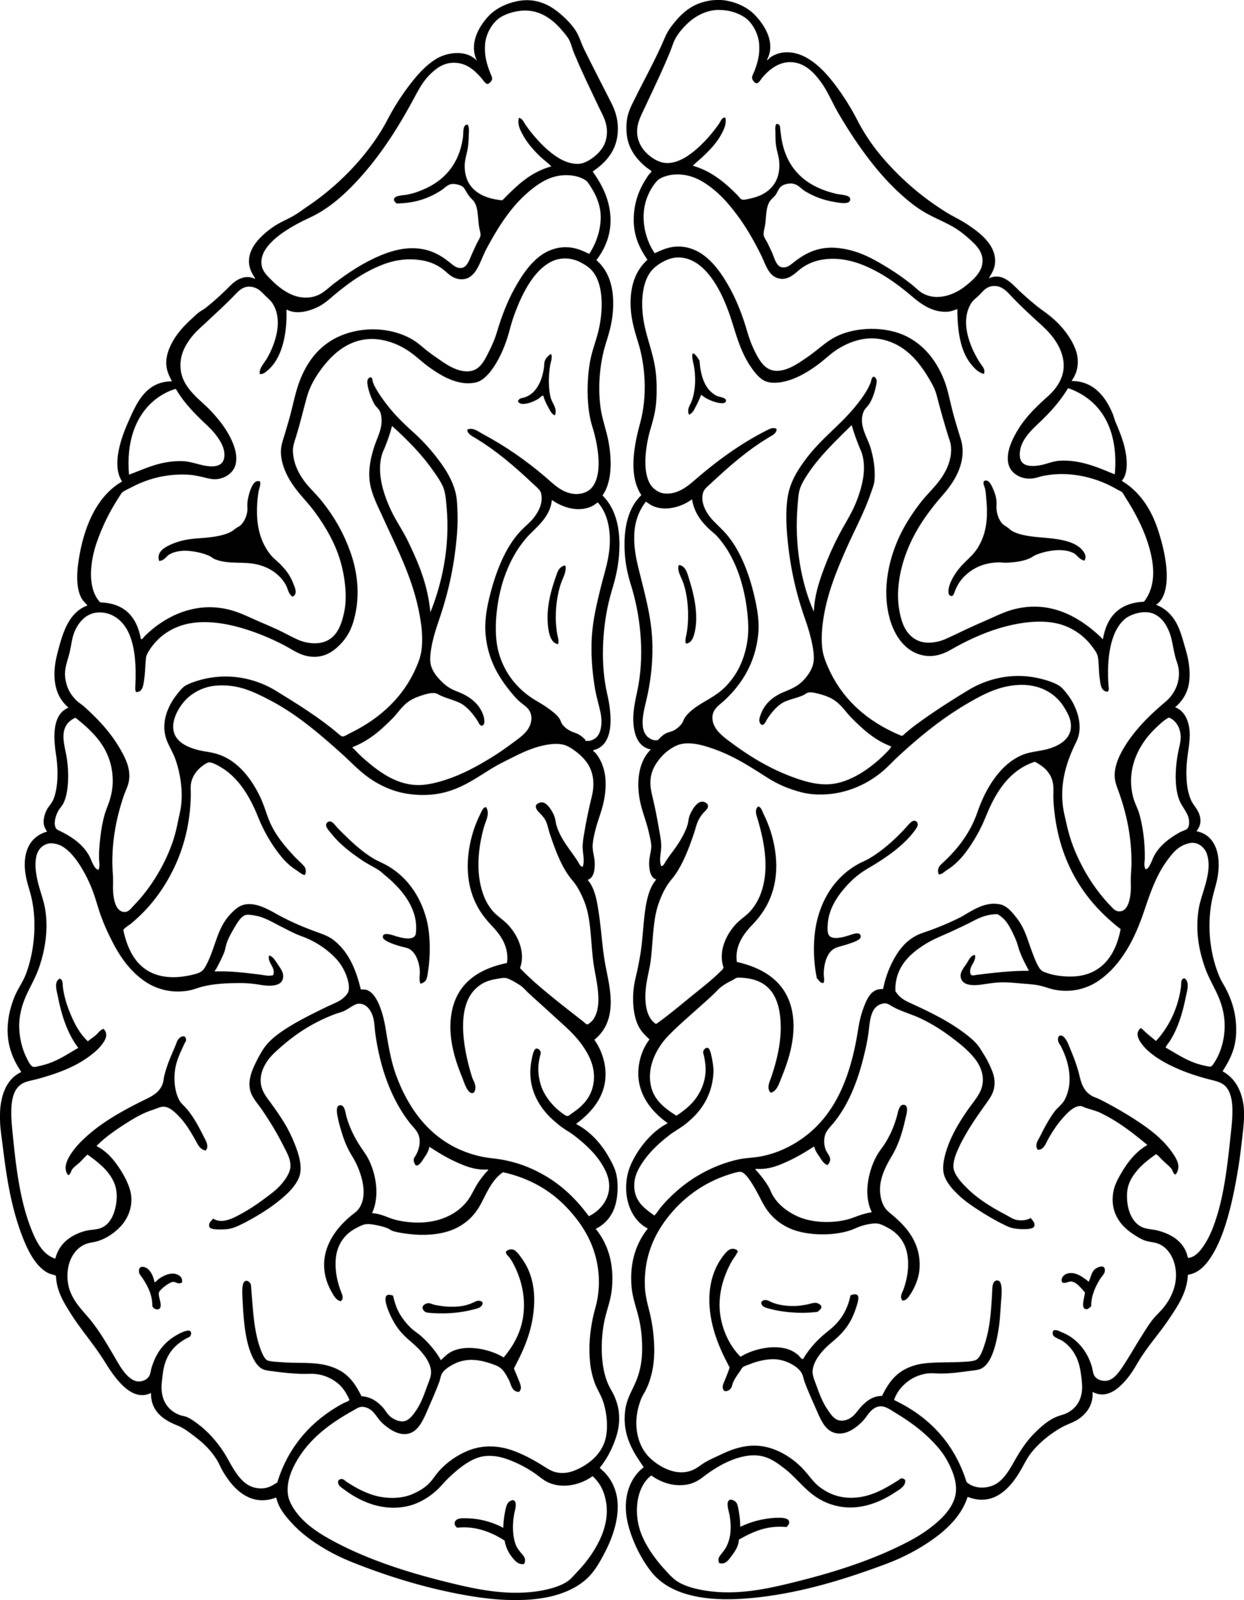 top view illustration of a brain